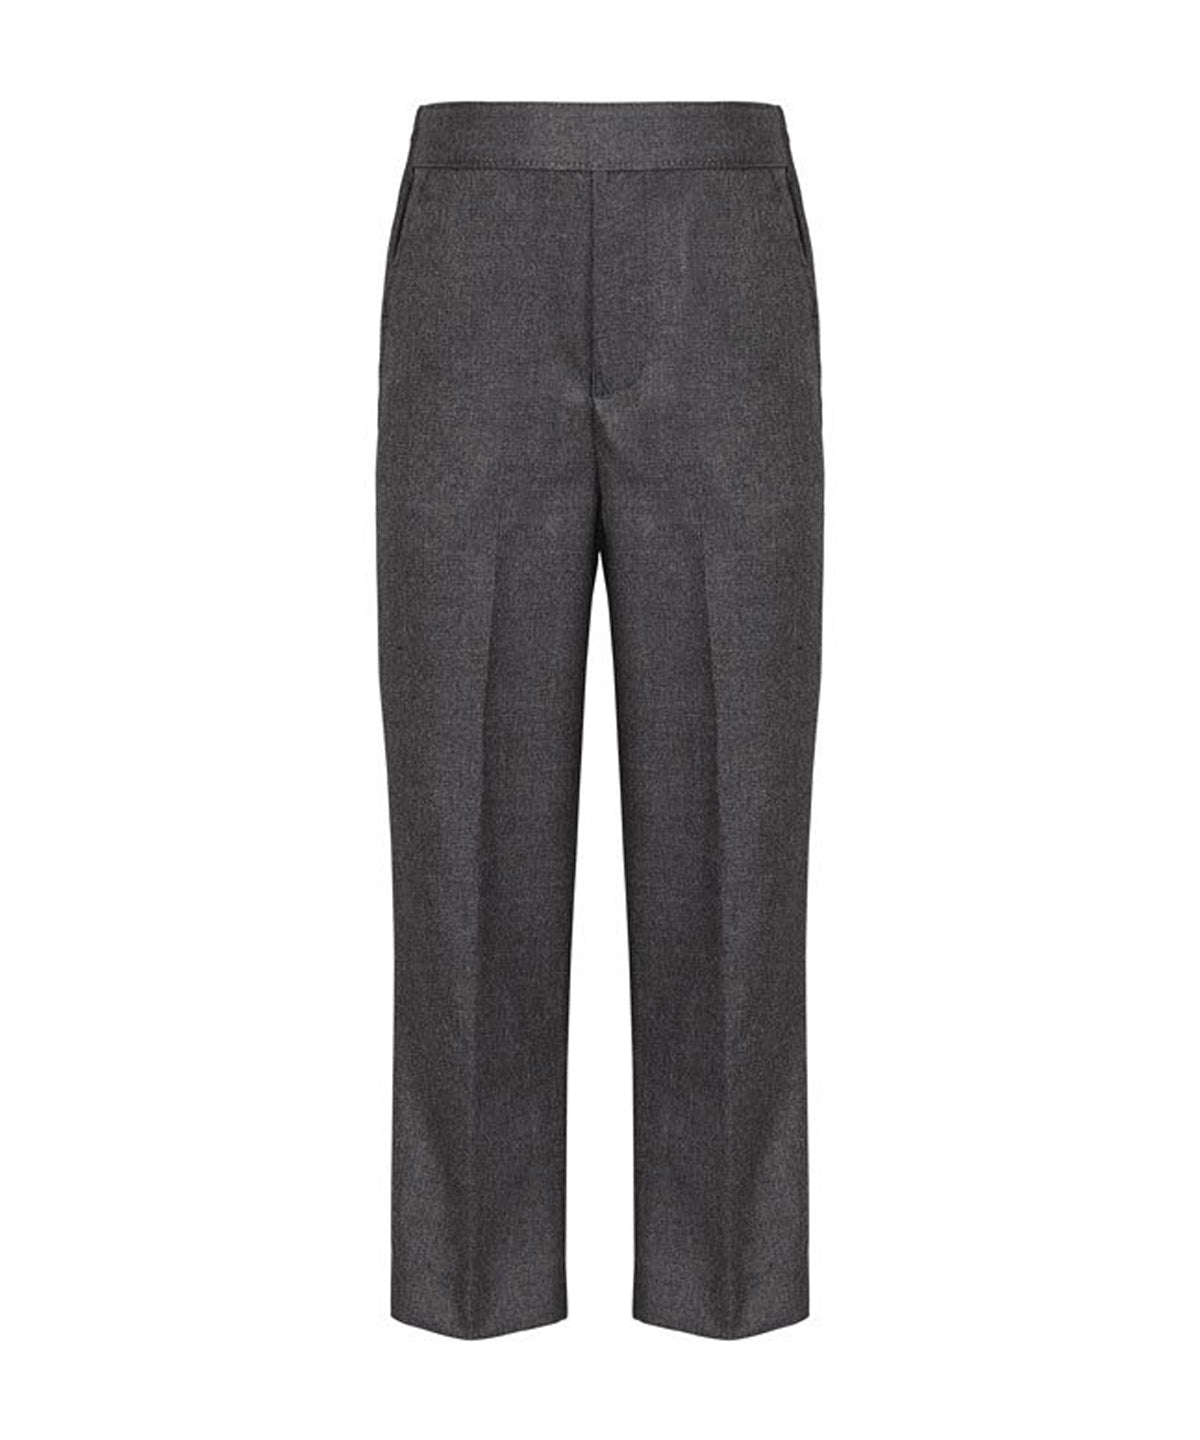 Boys Pull Up Trouser - Standard Fit